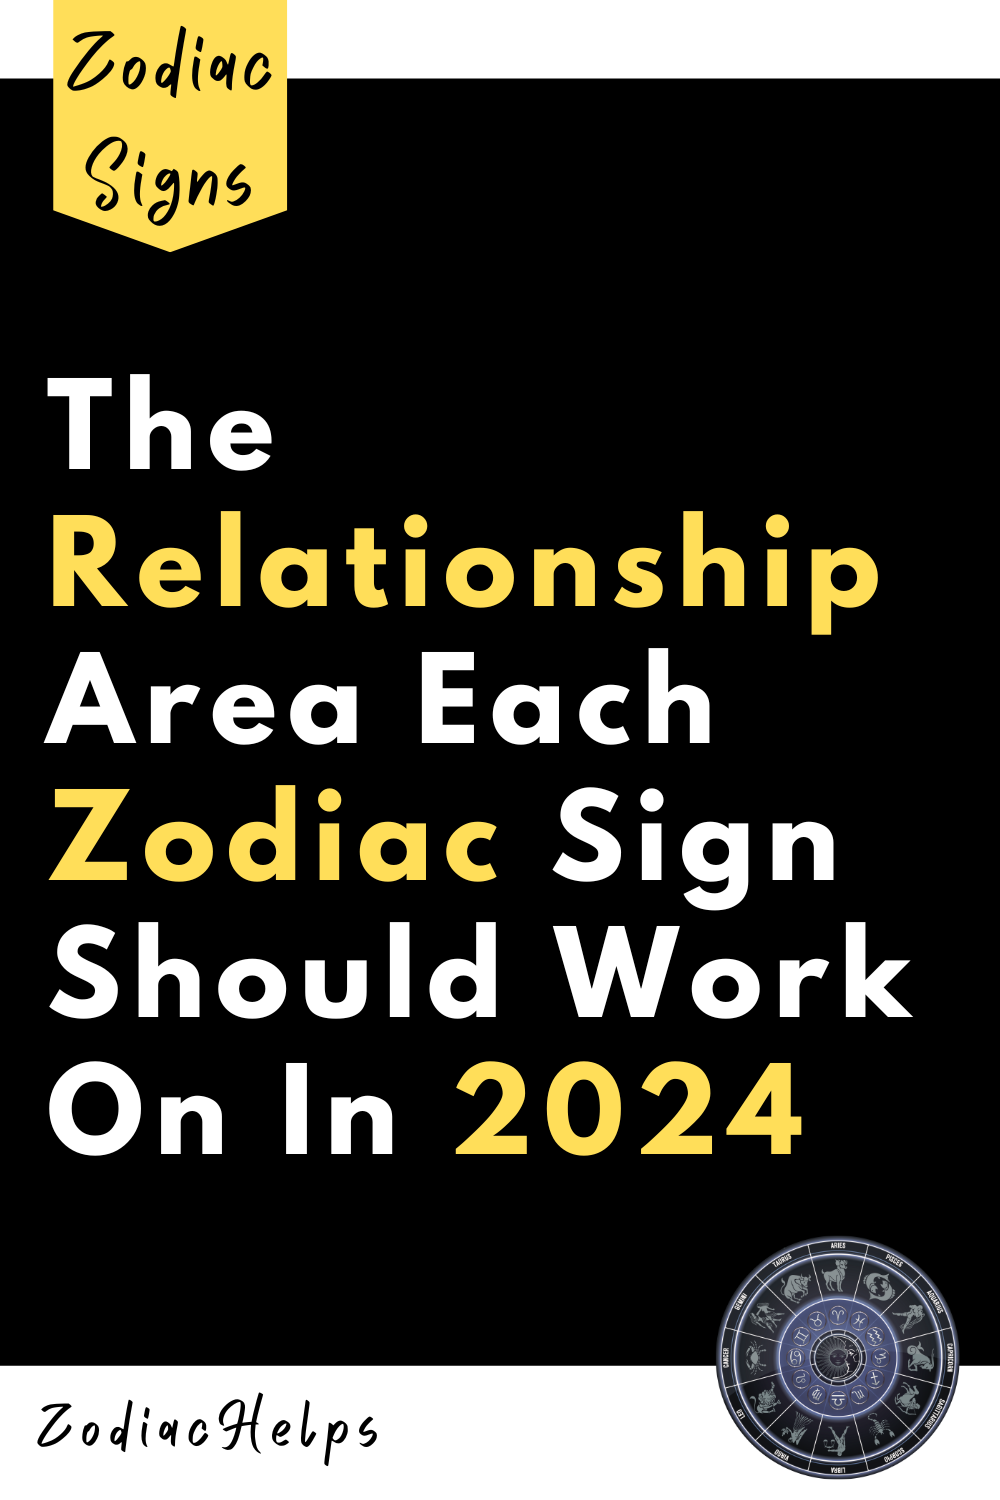 The Relationship Area Each Zodiac Sign Should Work On In 2024